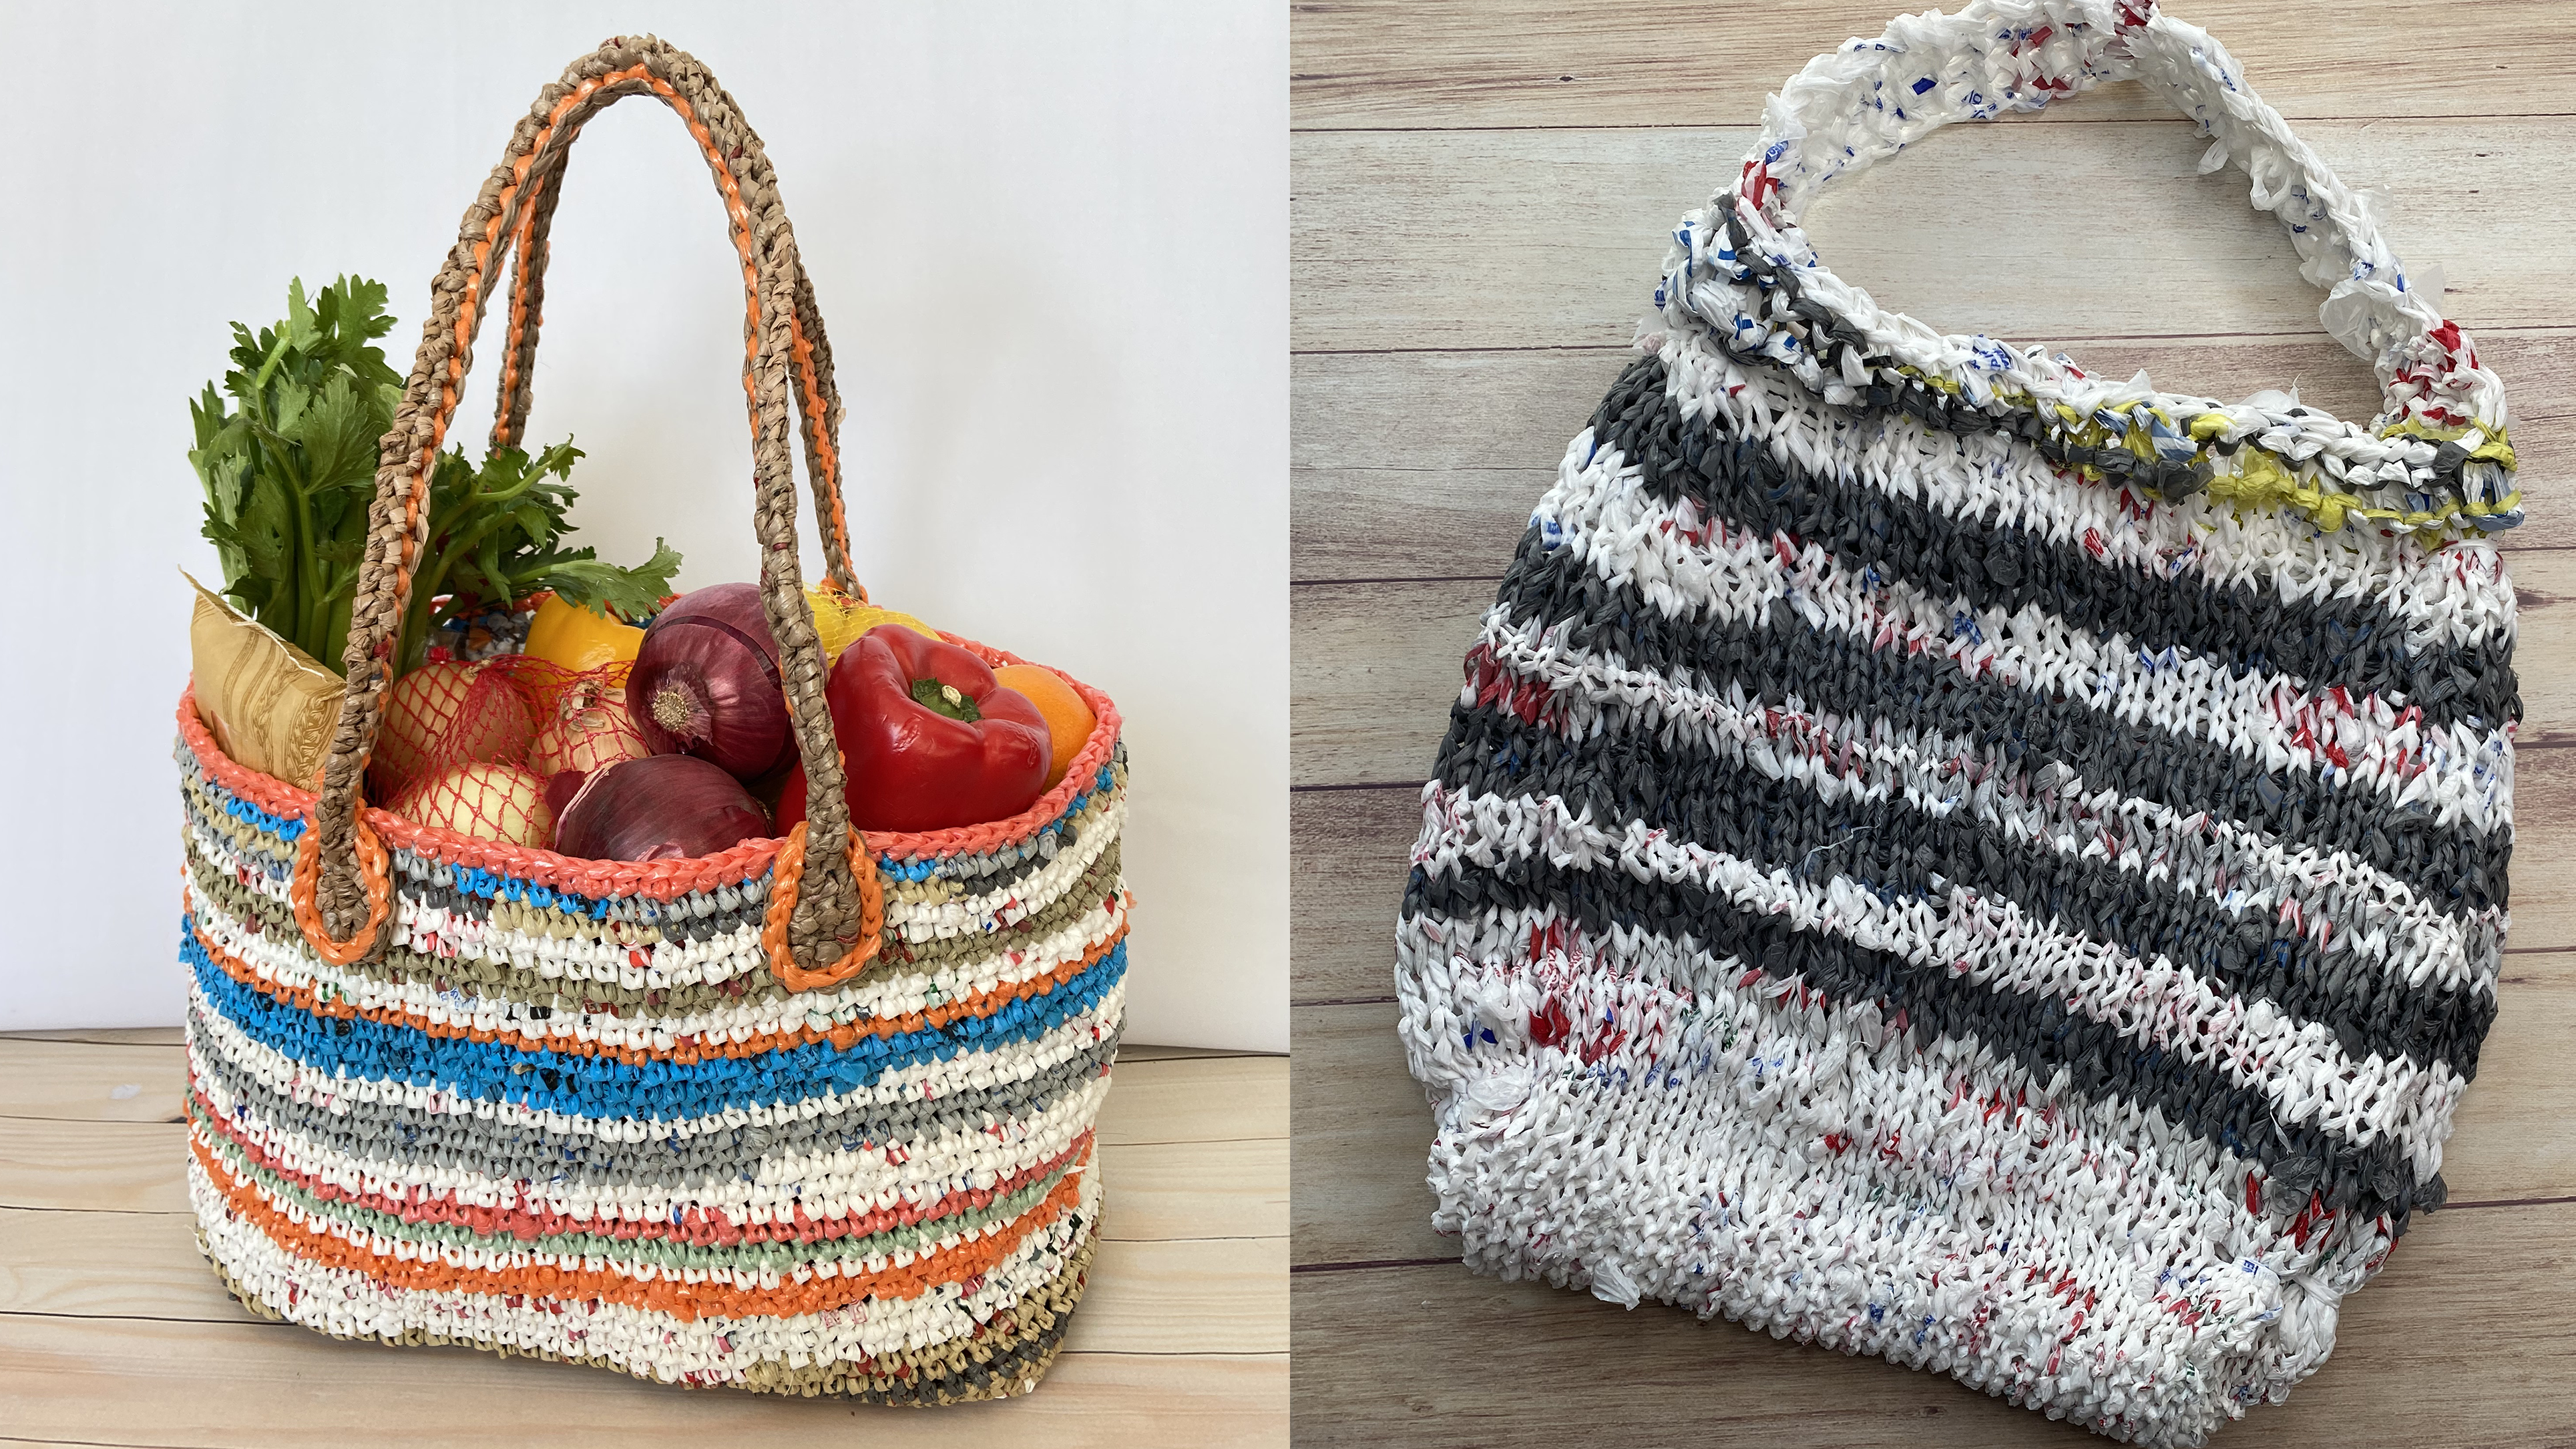 Crochet Fun Beach Bags and Totes From Recycled Plastic Bags